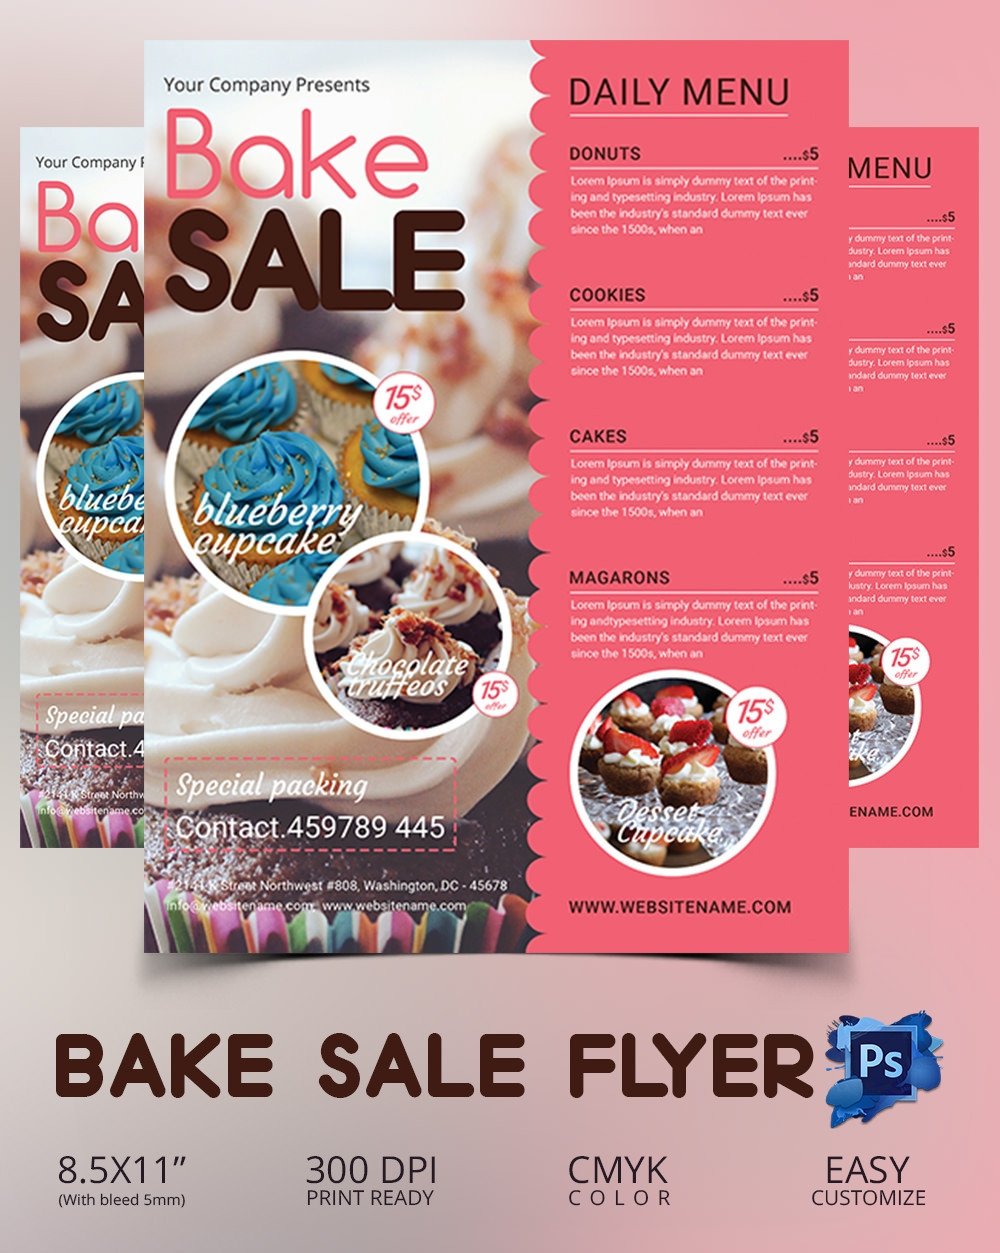 Bake Sale Flyer Template 34 Free PSD Indesign AI